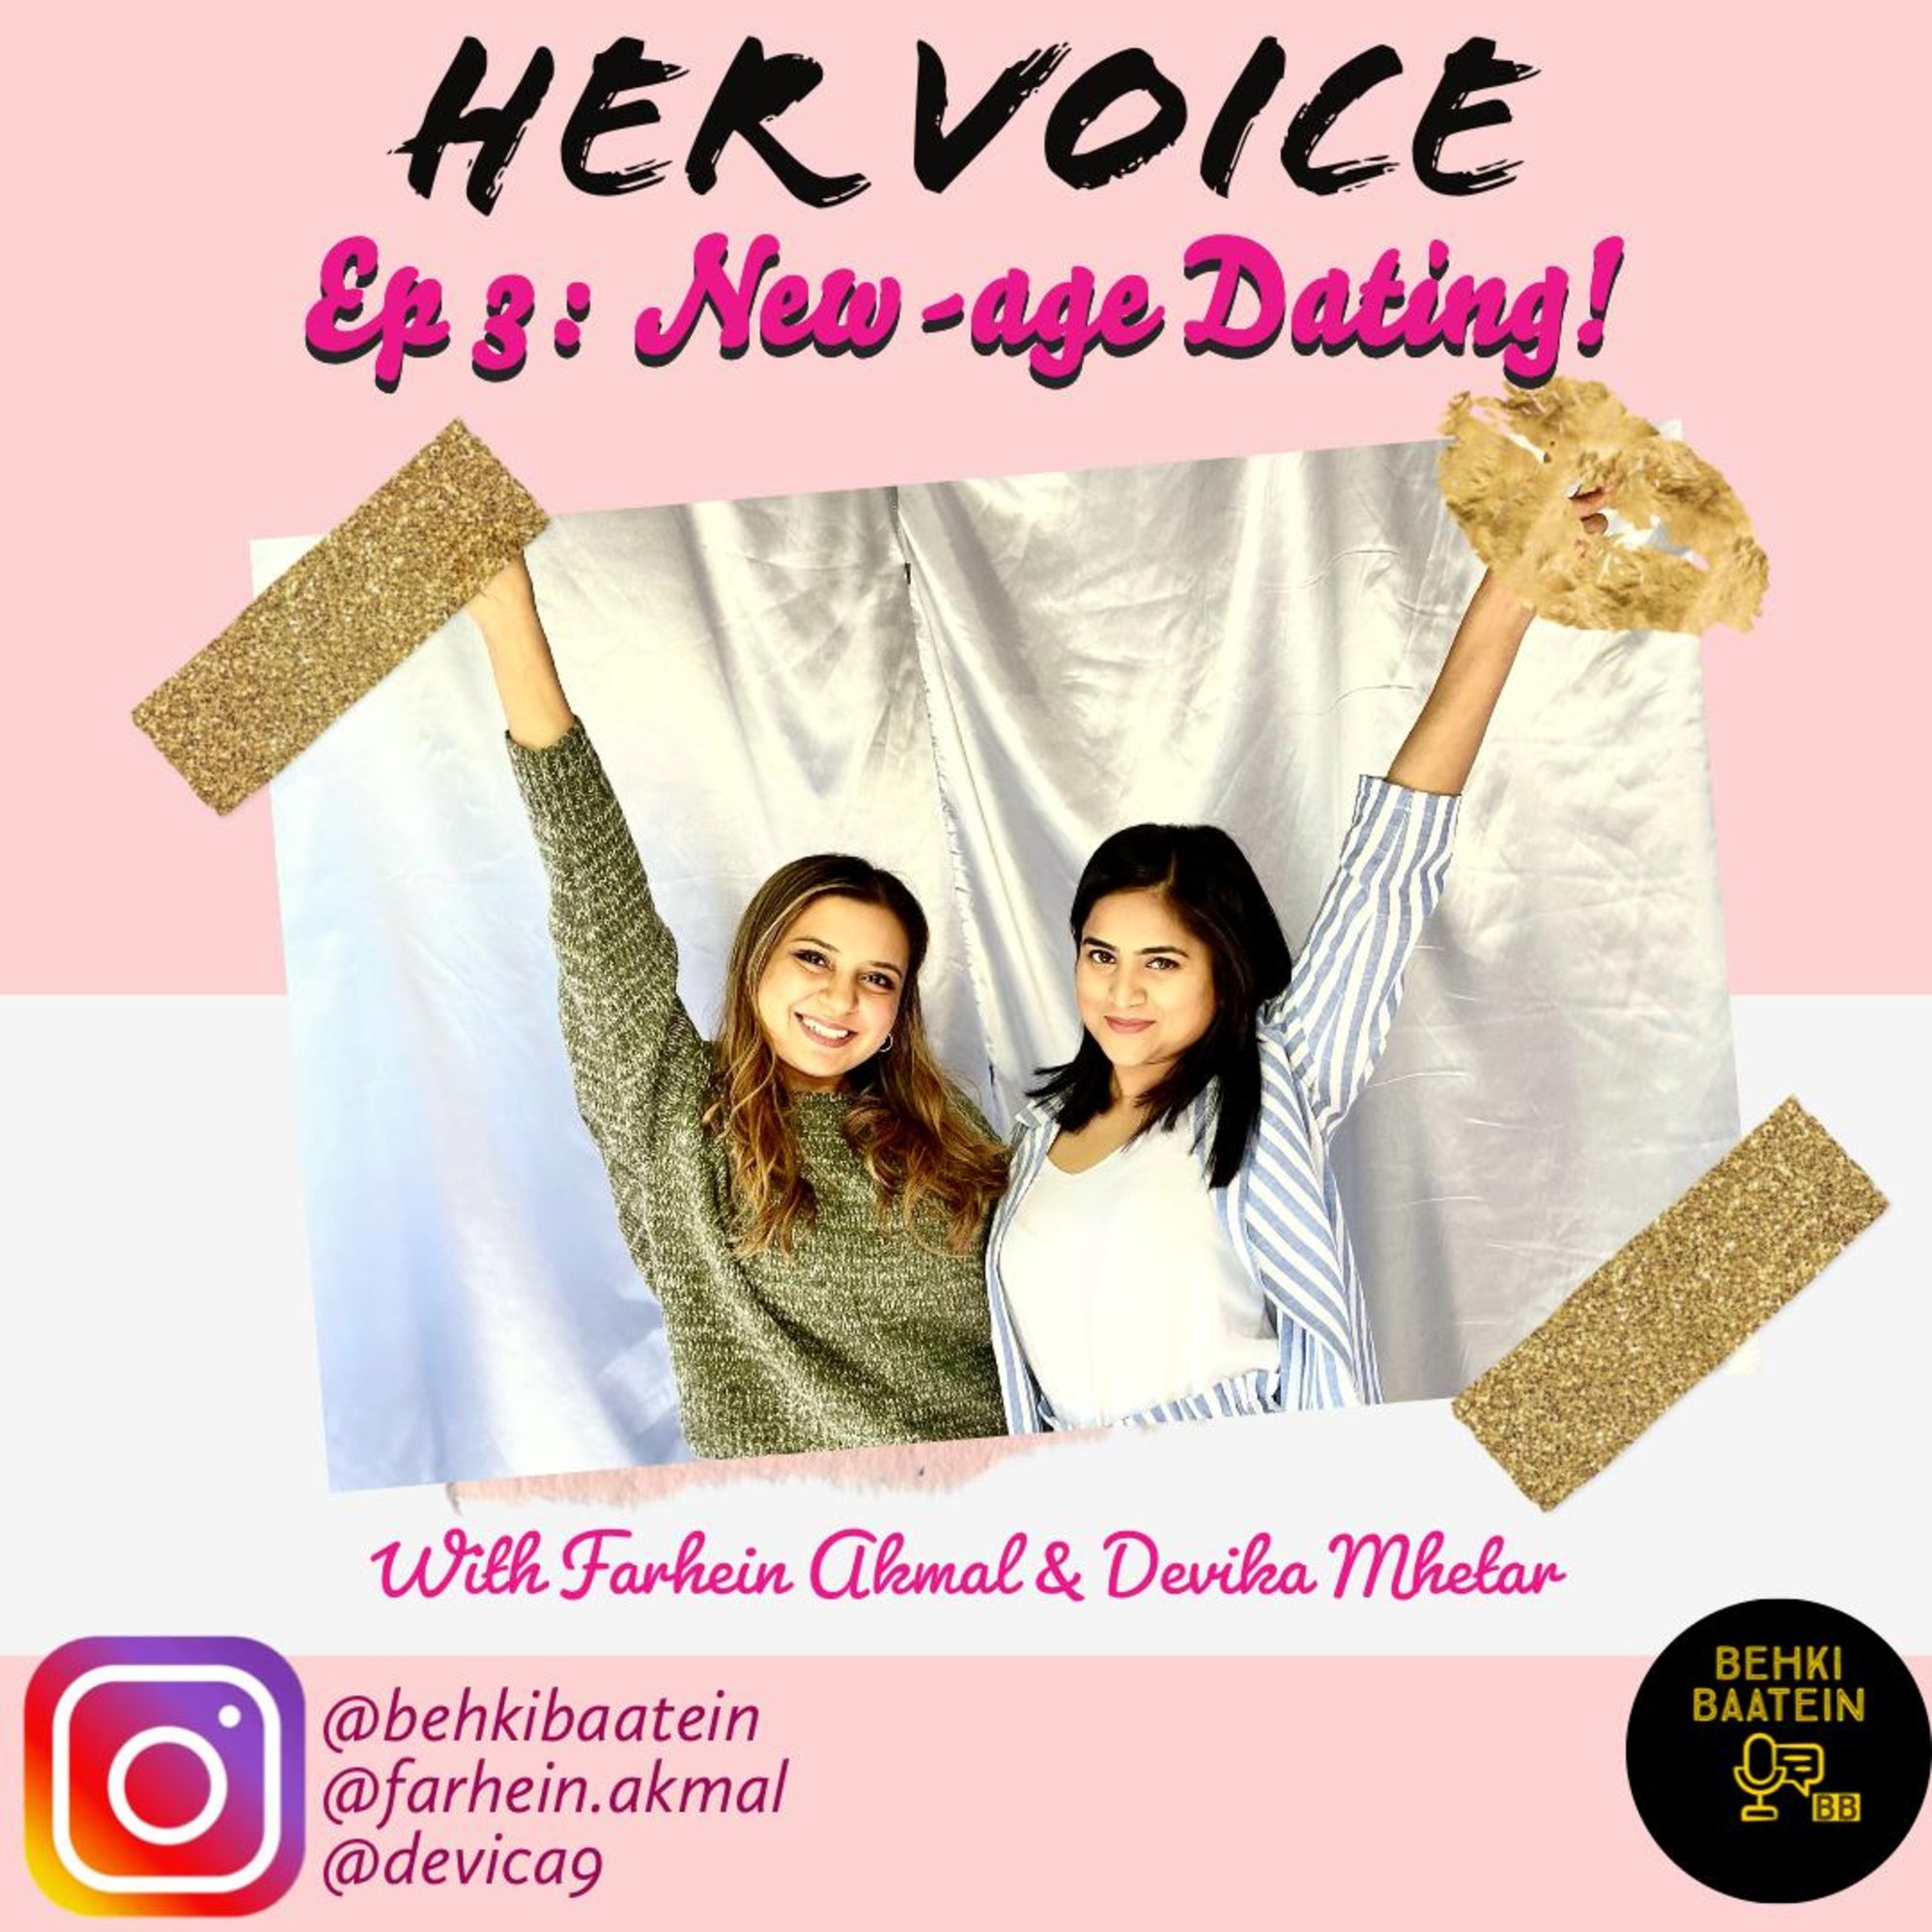 Her Voice - Ep 3: New-age Dating with Farhein Akmal and Devika Mhetar